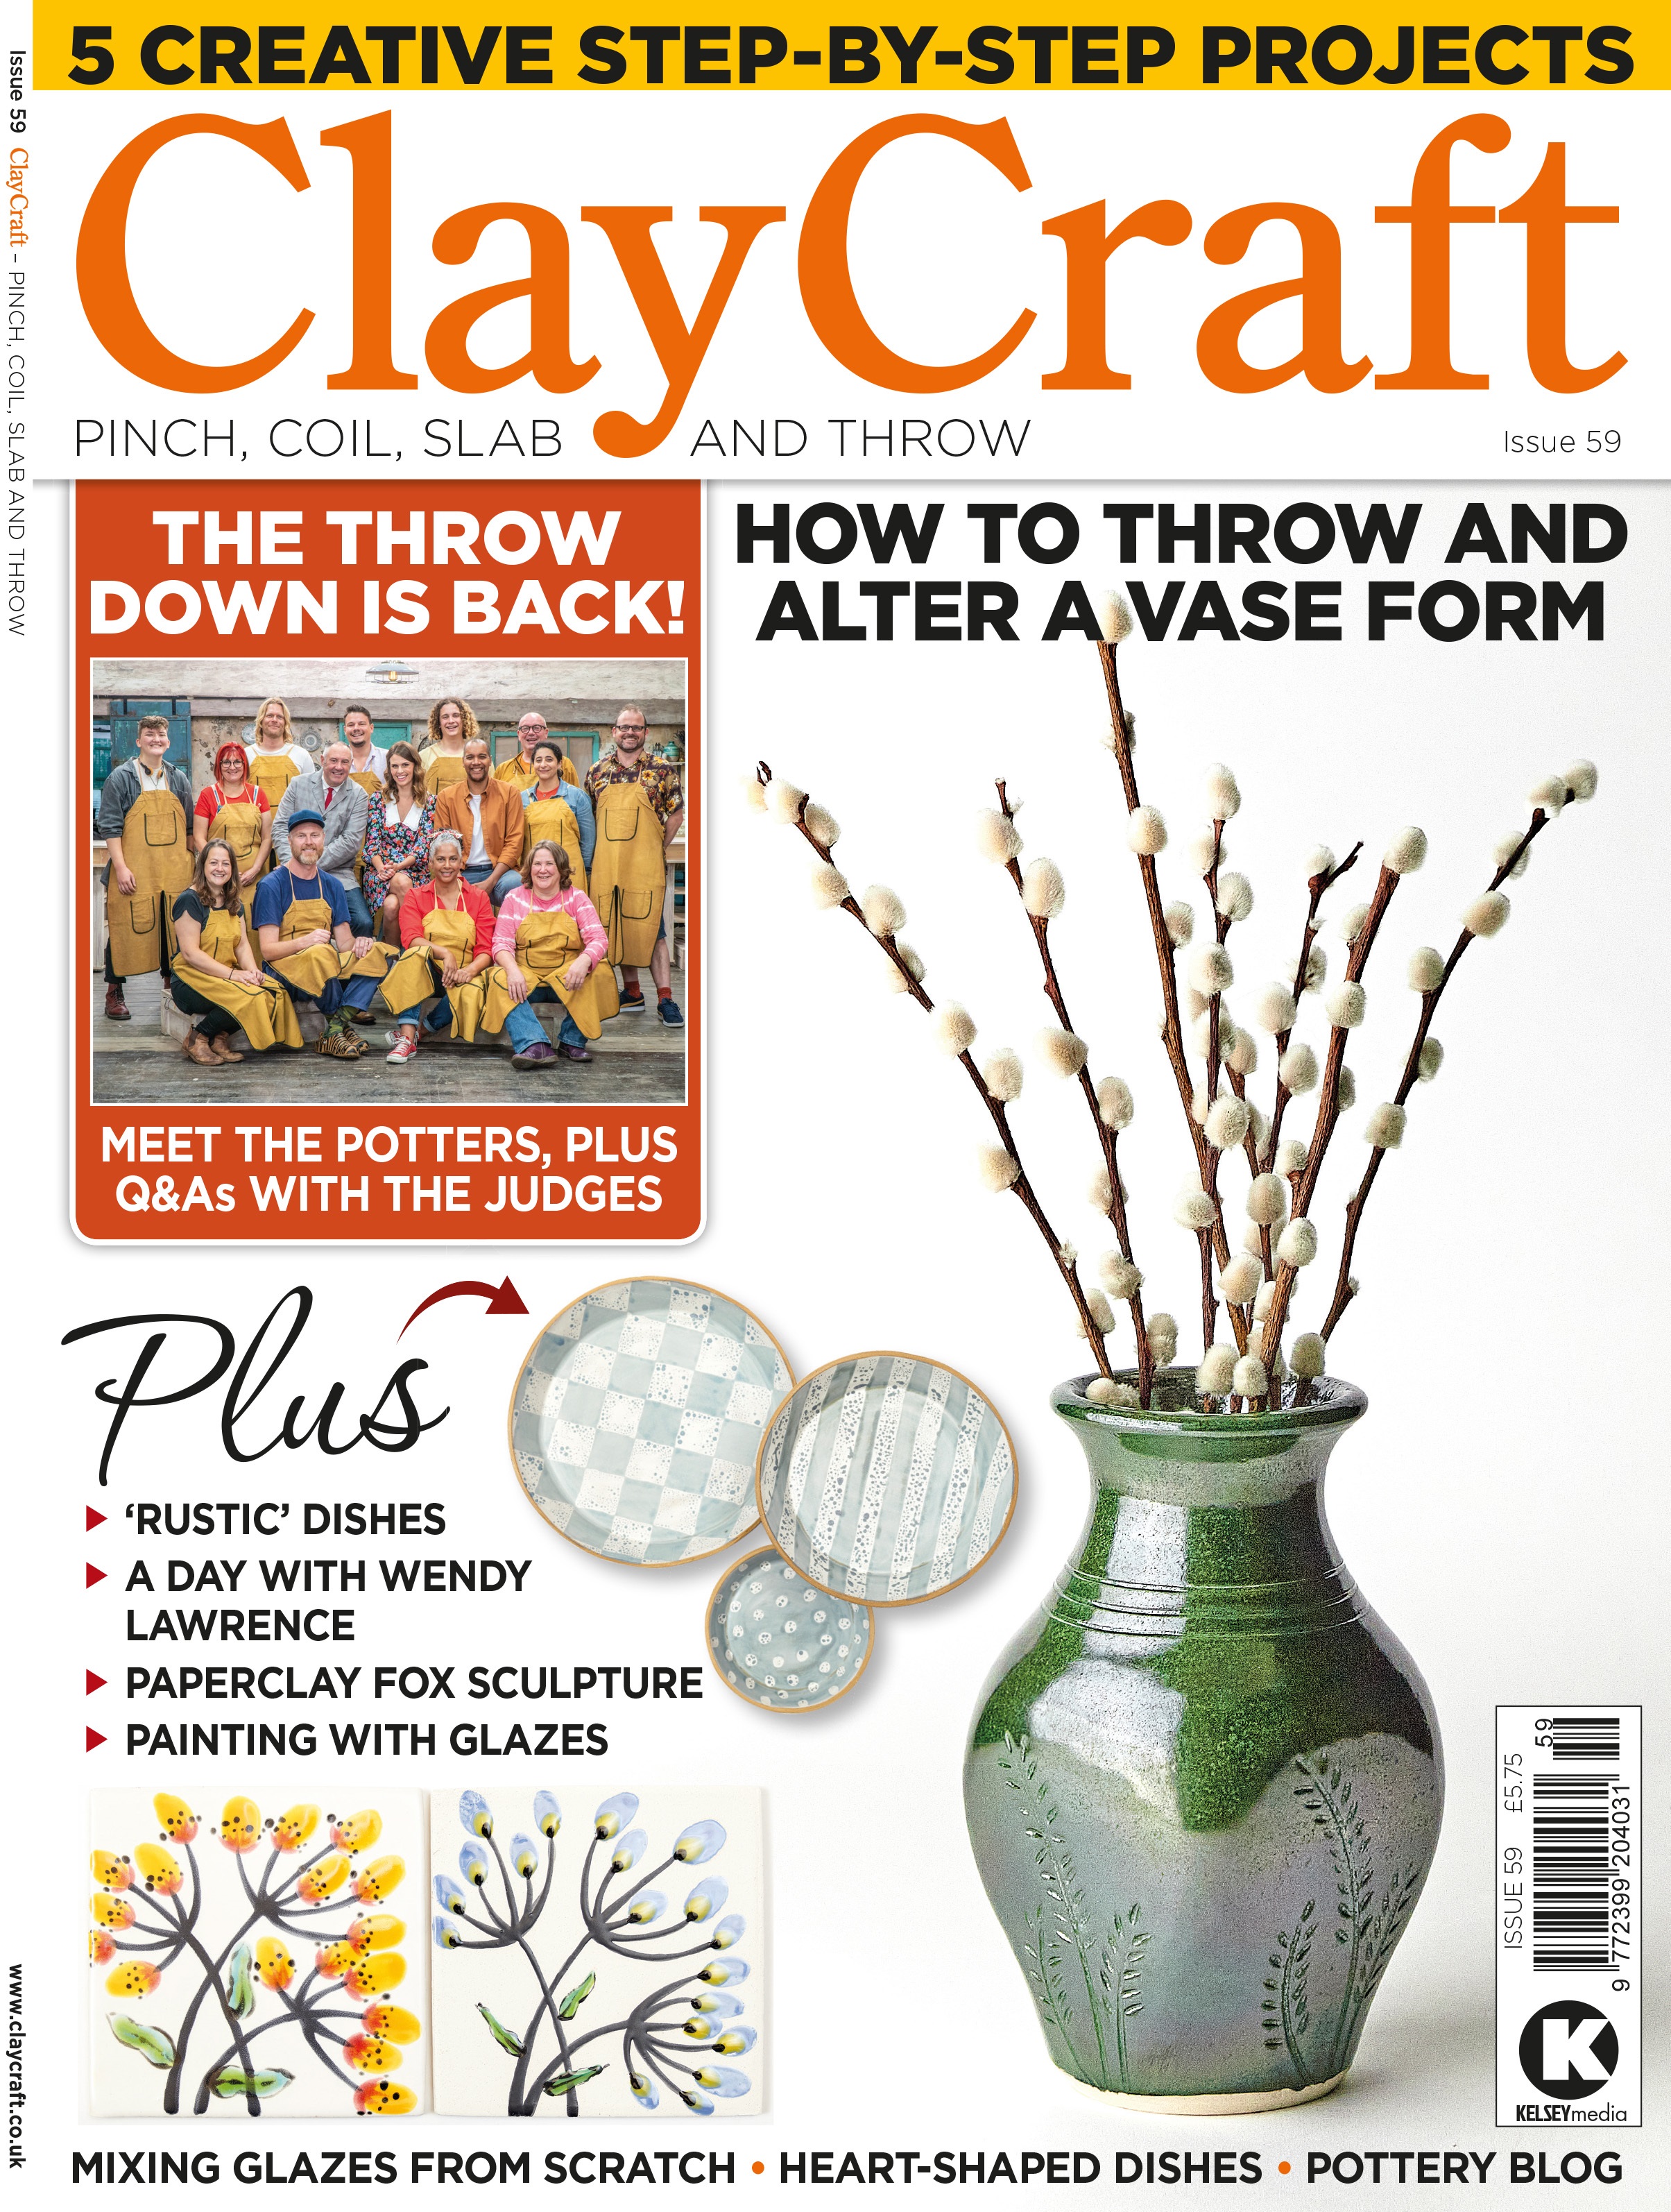 ClayCraft 59 Throw and Alter a Vase Form